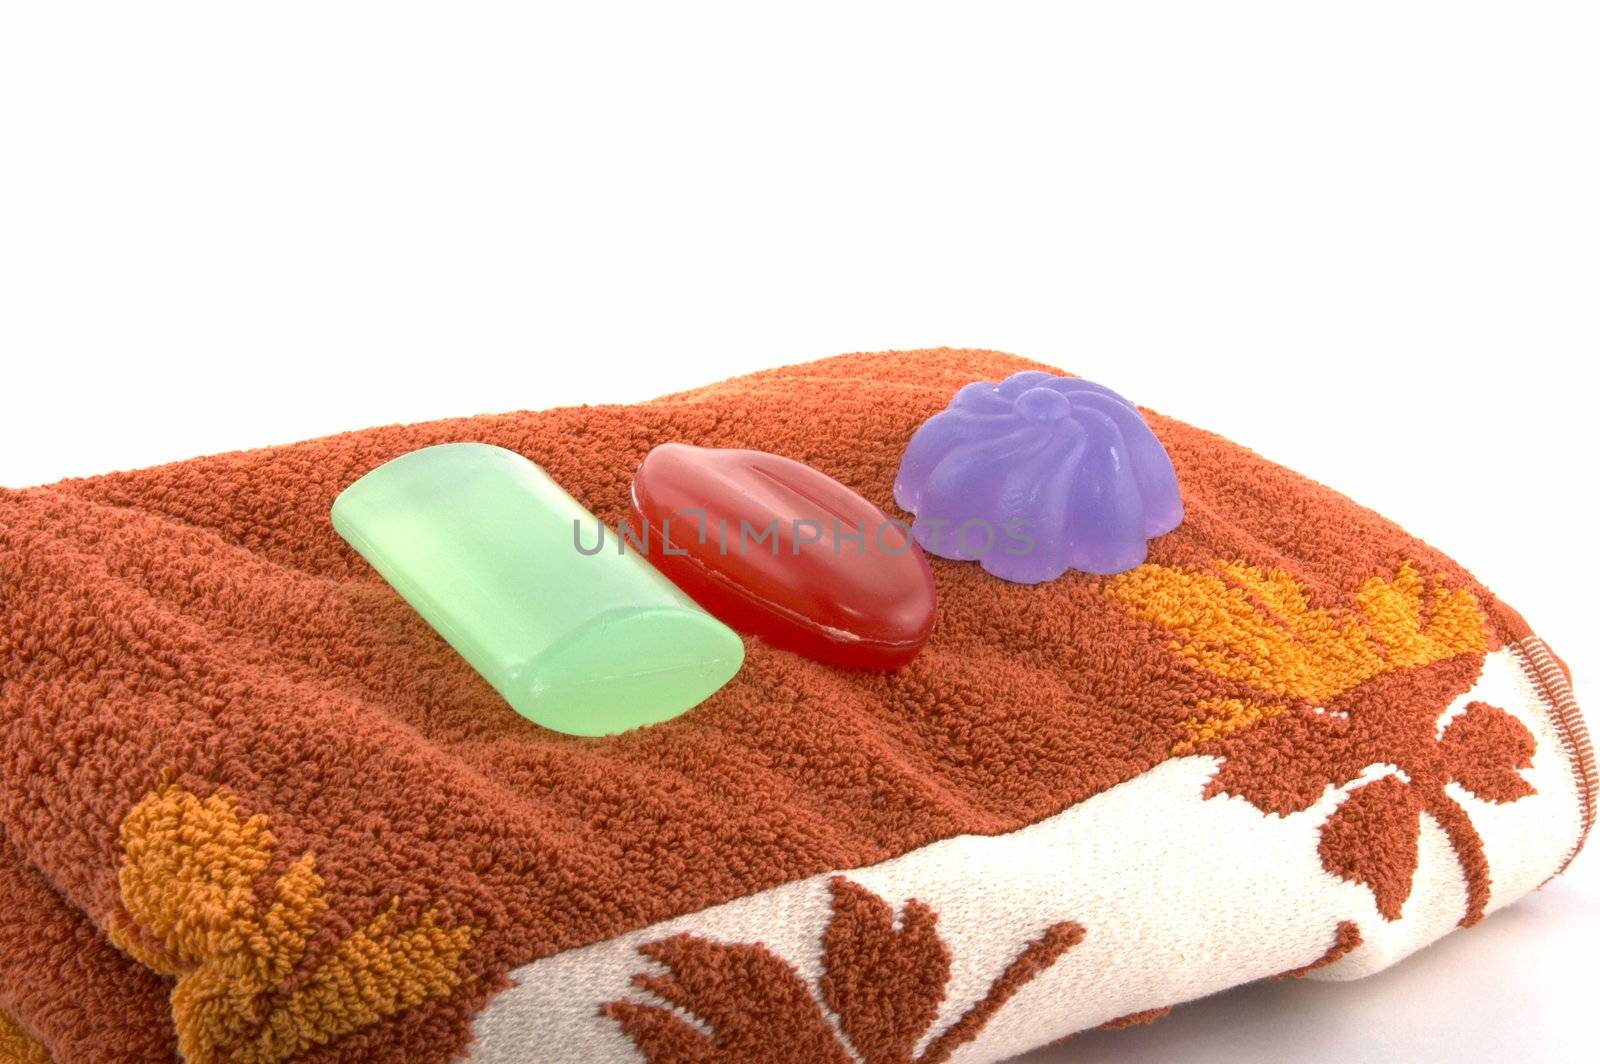 Set from three grades of translucent soap laying on a brown terry towel